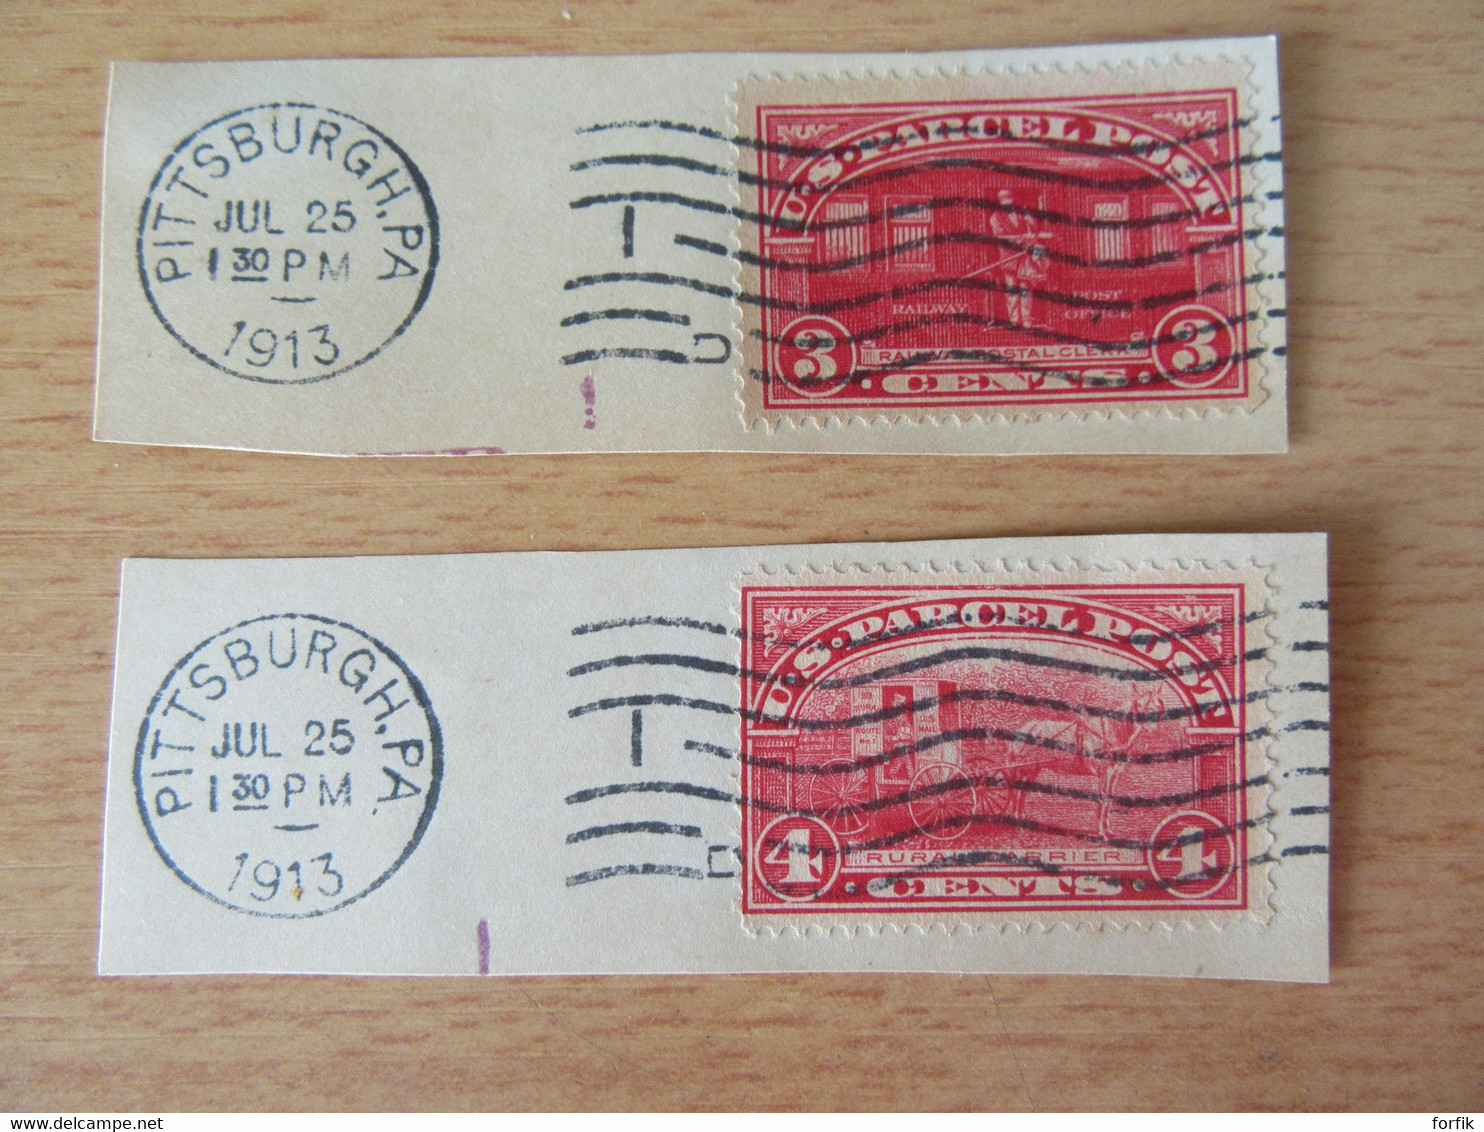 USA - Us Parcel Post - 2 Timbres Sur Fragments - Pittsburgh July 25 1913 - Parcel Post & Special Handling